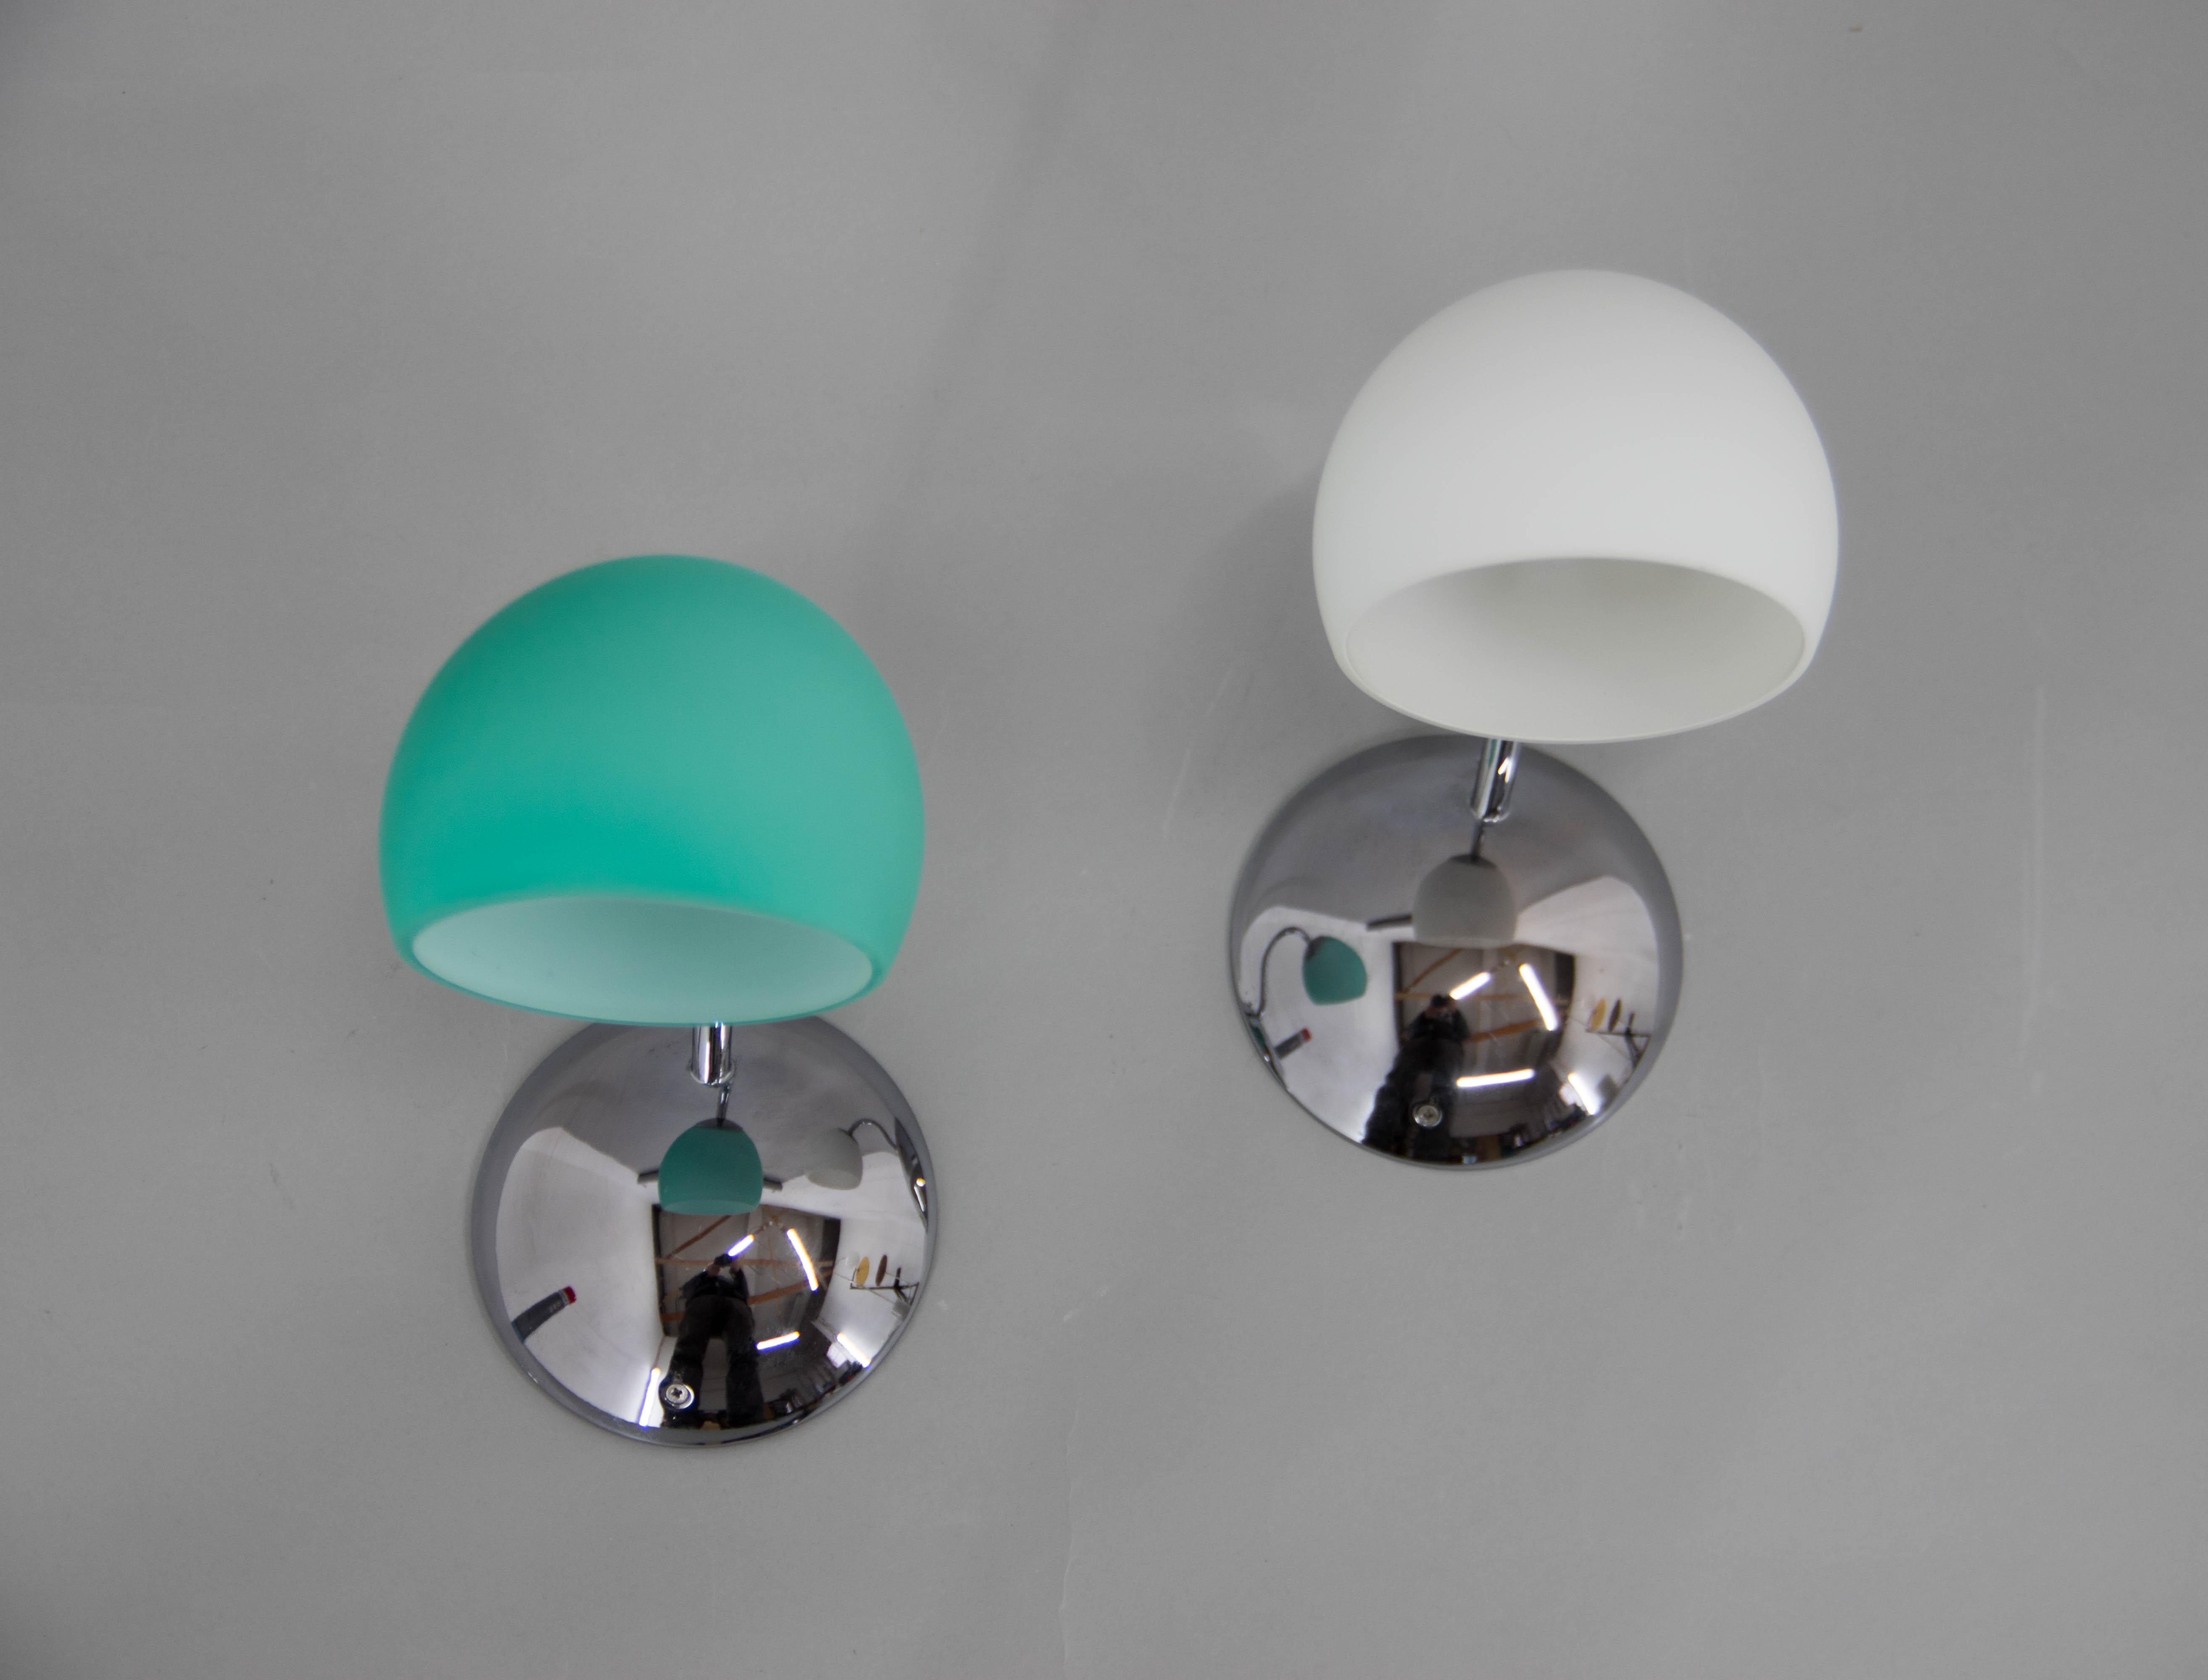 Set of Two Leucos P3 Wall Lights designed by Toso & Massari, Italy, 2010 For Sale 3